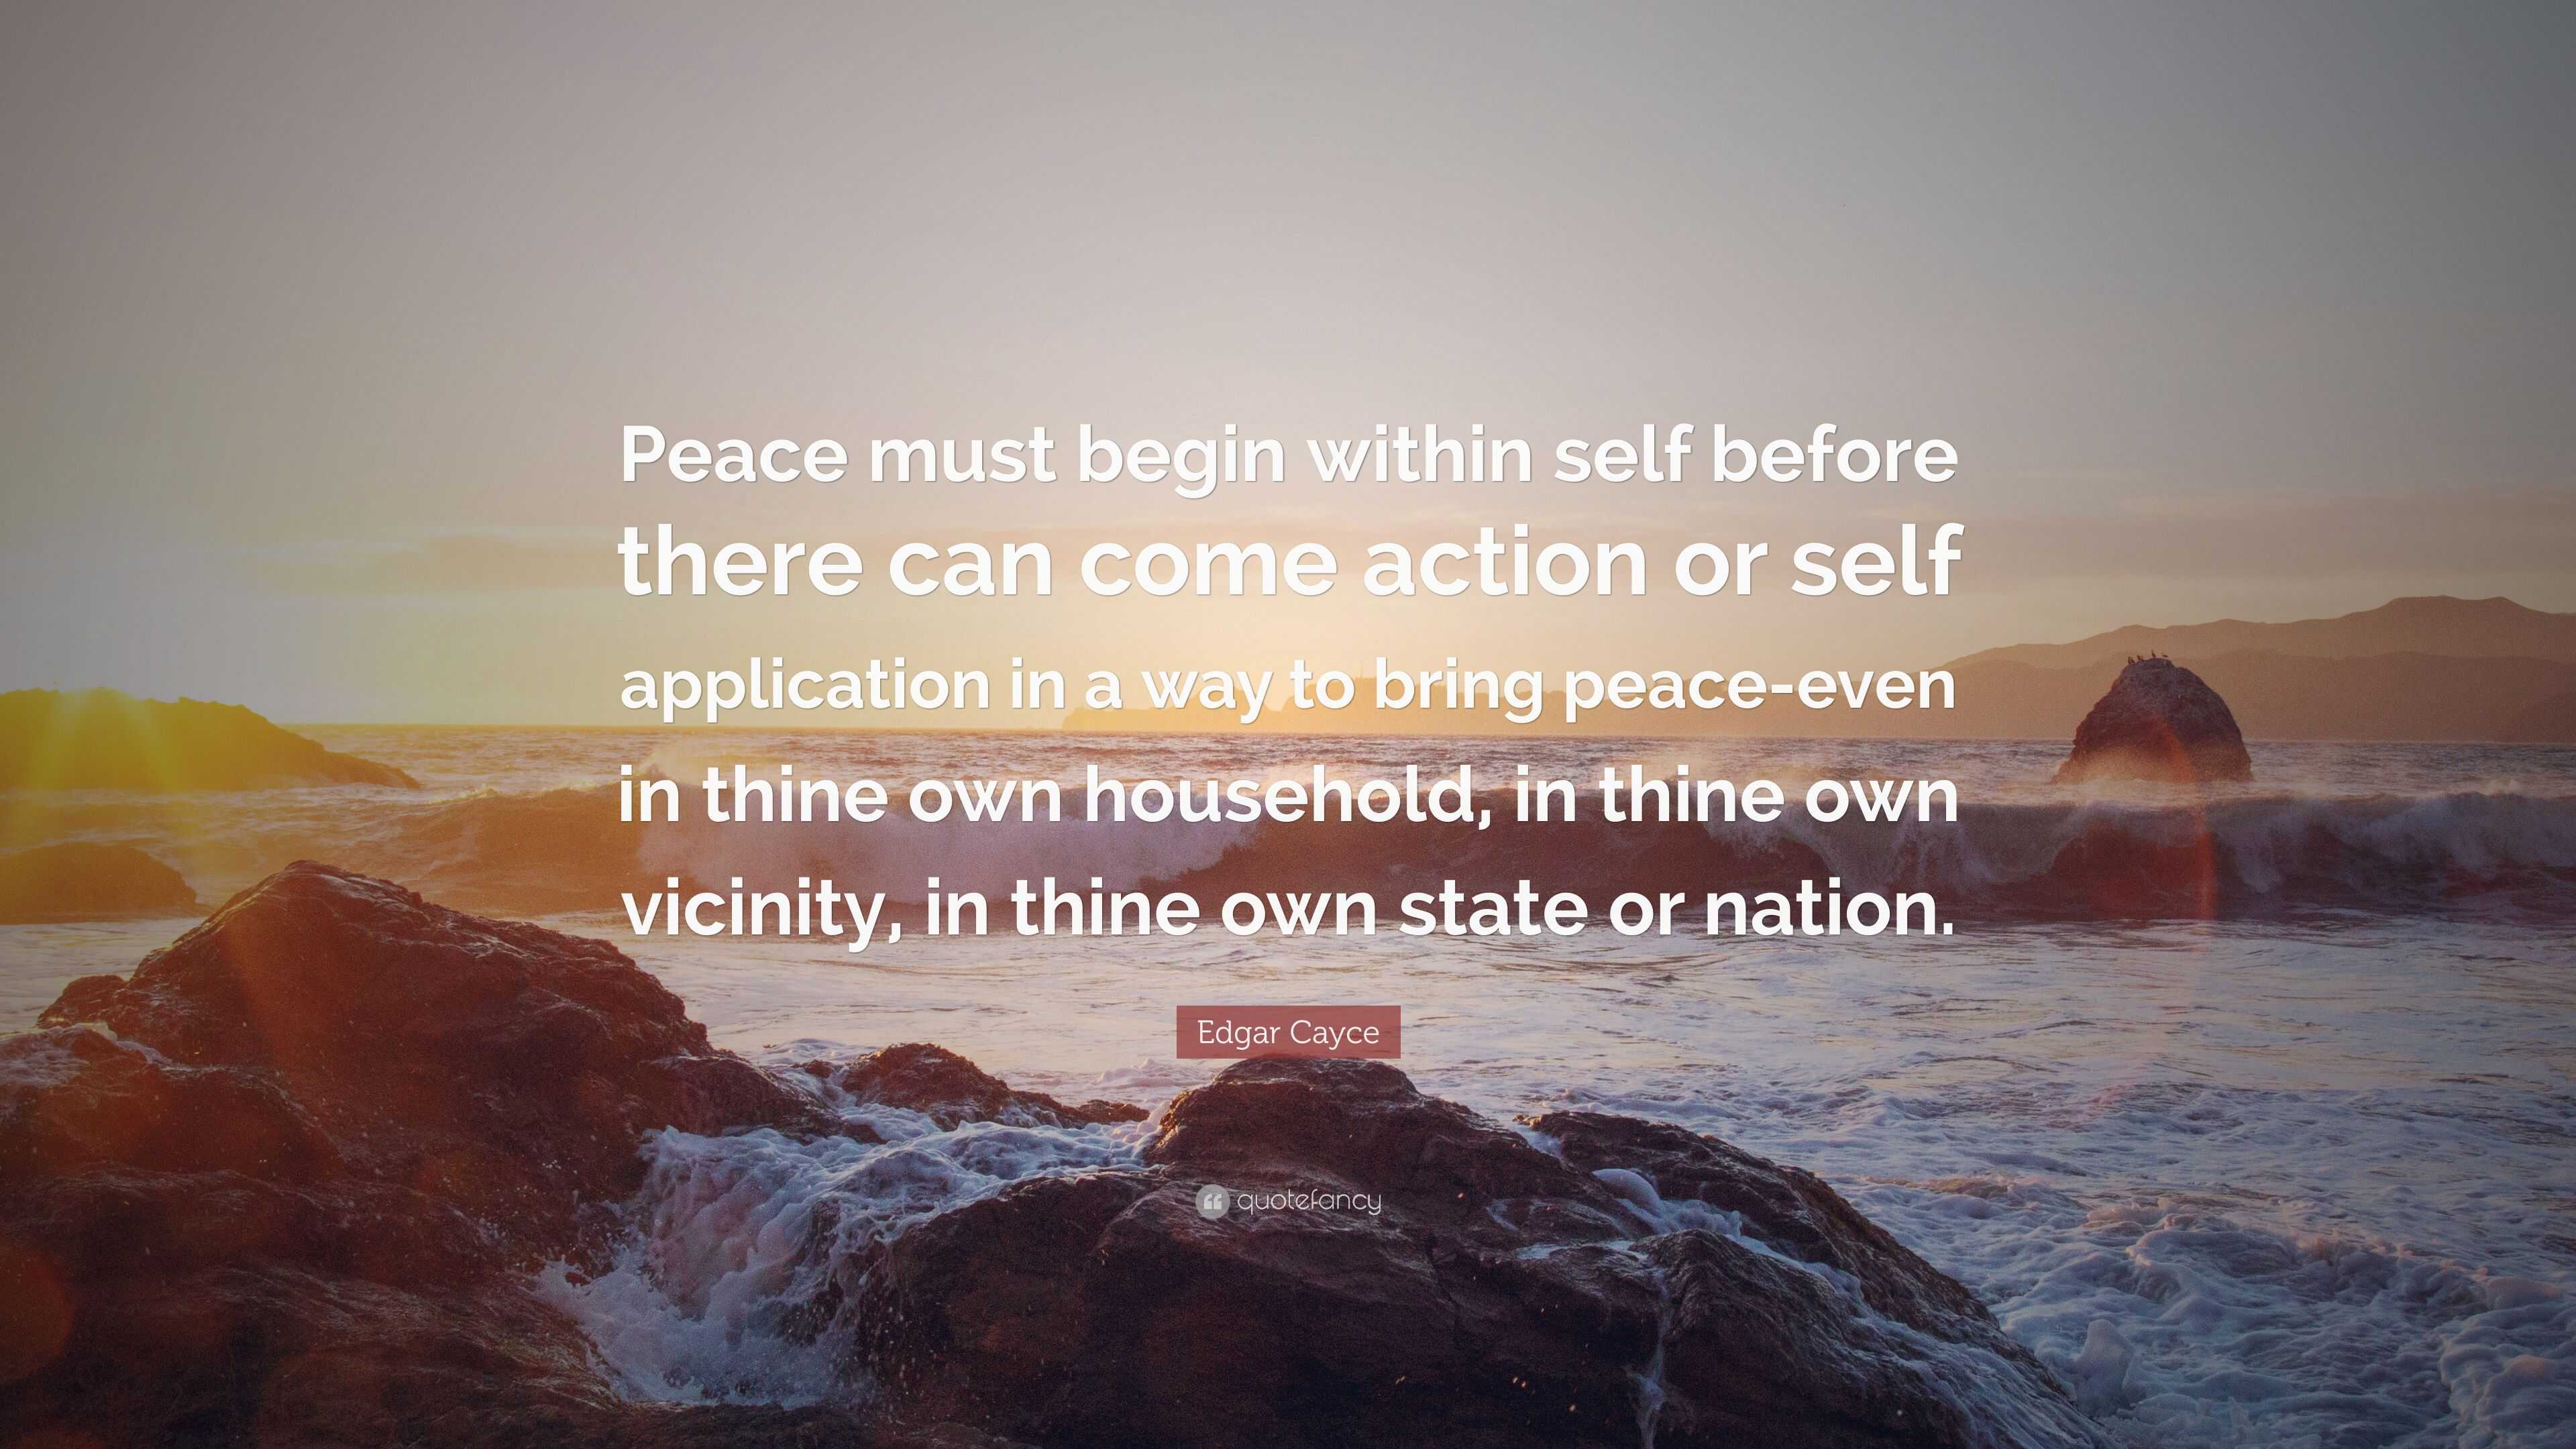 Edgar Cayce Quote: “Peace must begin within self before there can come ...